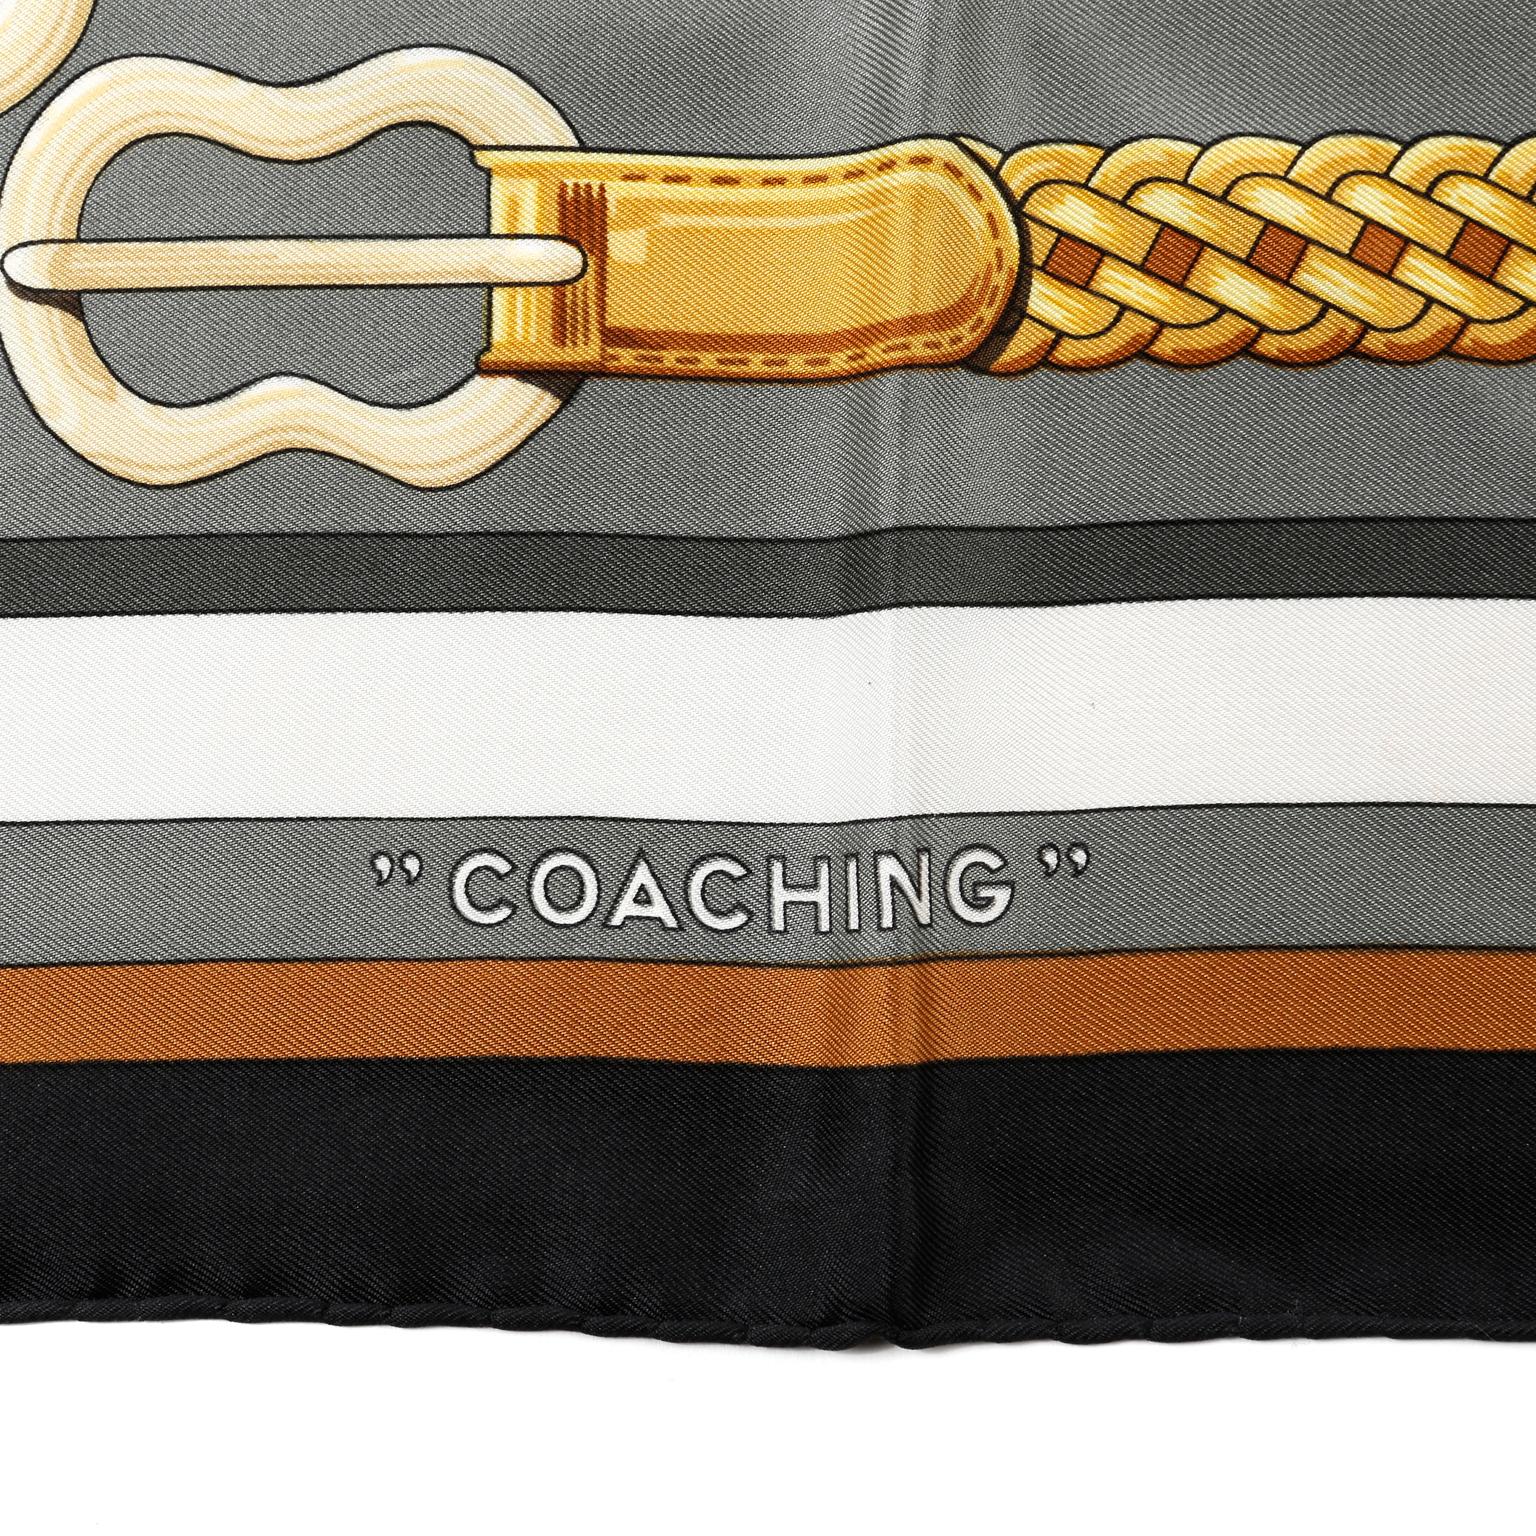 This authentic Hermès Coaching 90 cm Silk Scarf is in pristine condition.   Designed by Julie Abedie, this is a reissue of the original 1977 design.  Equestrian theme featuring belts, harnesses, and straps.  Creamy white background with black